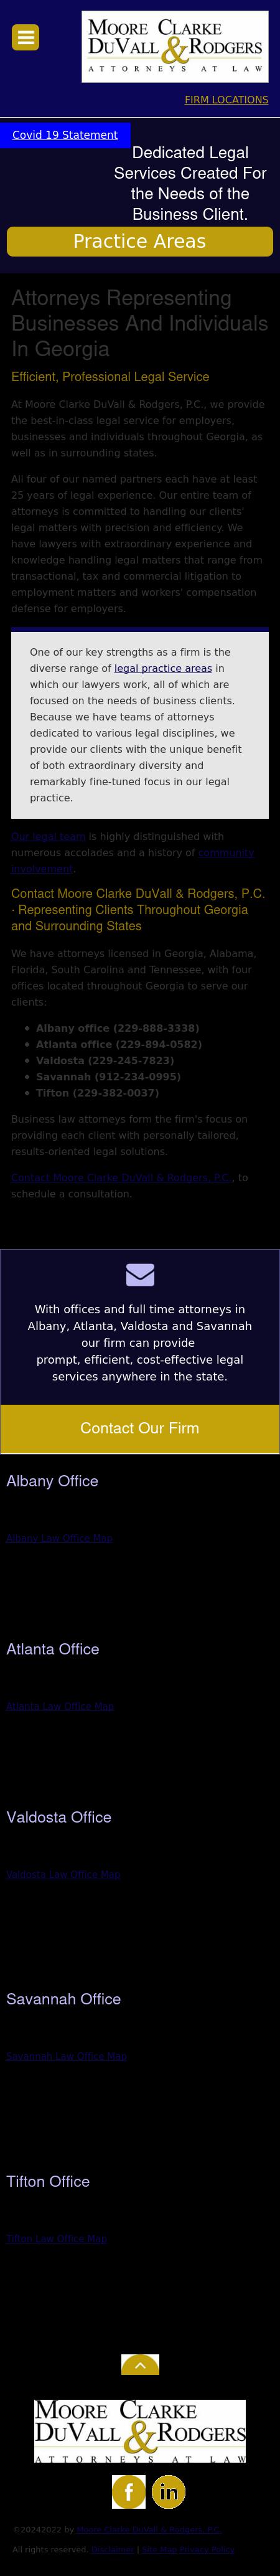 Moore Clarke DuVall & Rodgers, P.C. - Albany GA Lawyers